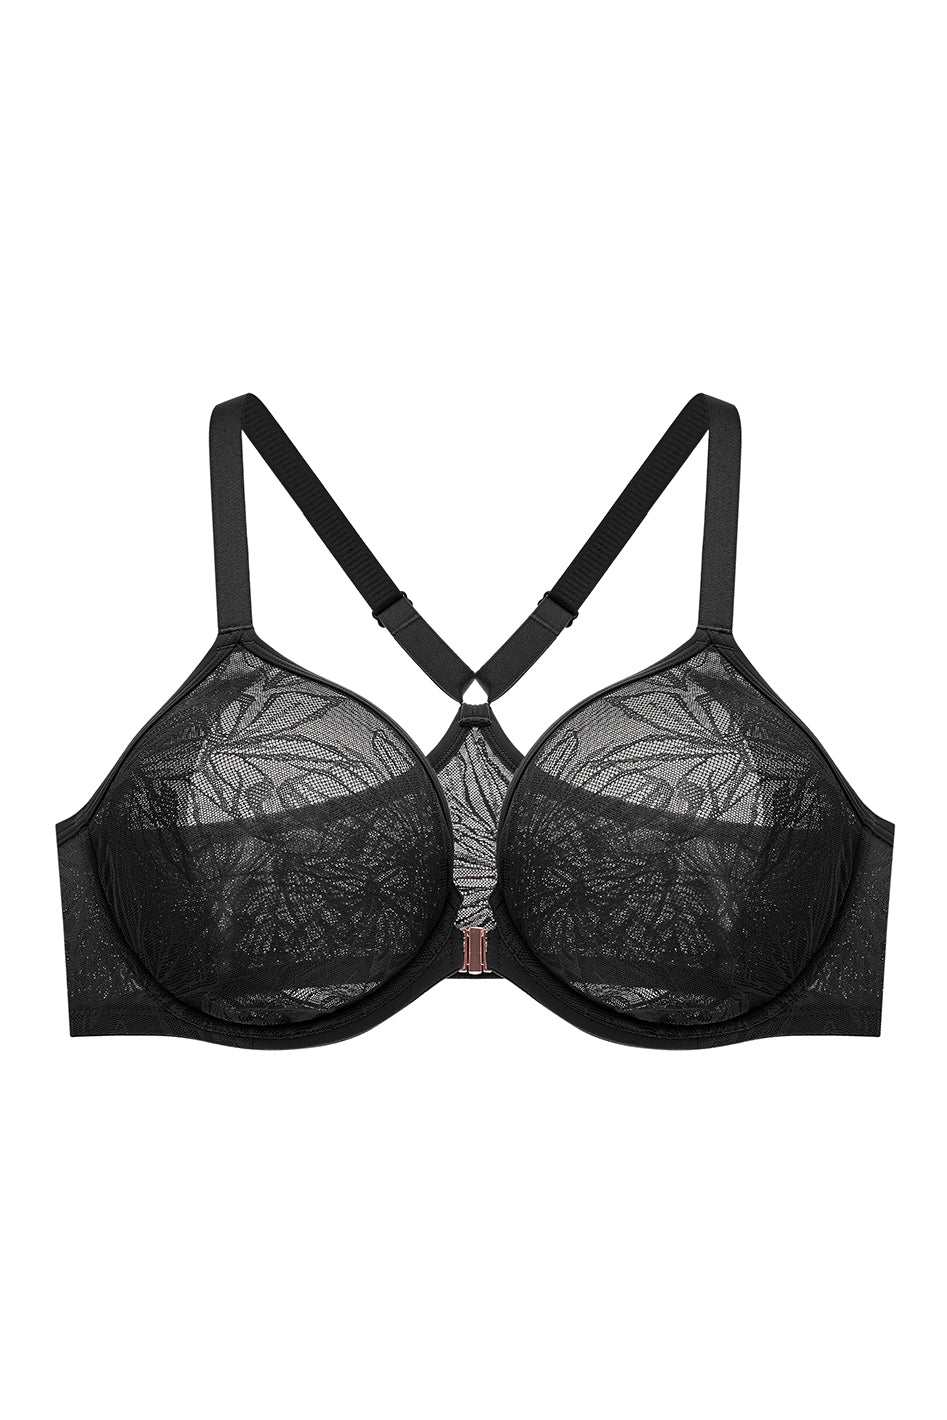 Shop Front Open Bras for Easy Convenience - Buy Now!